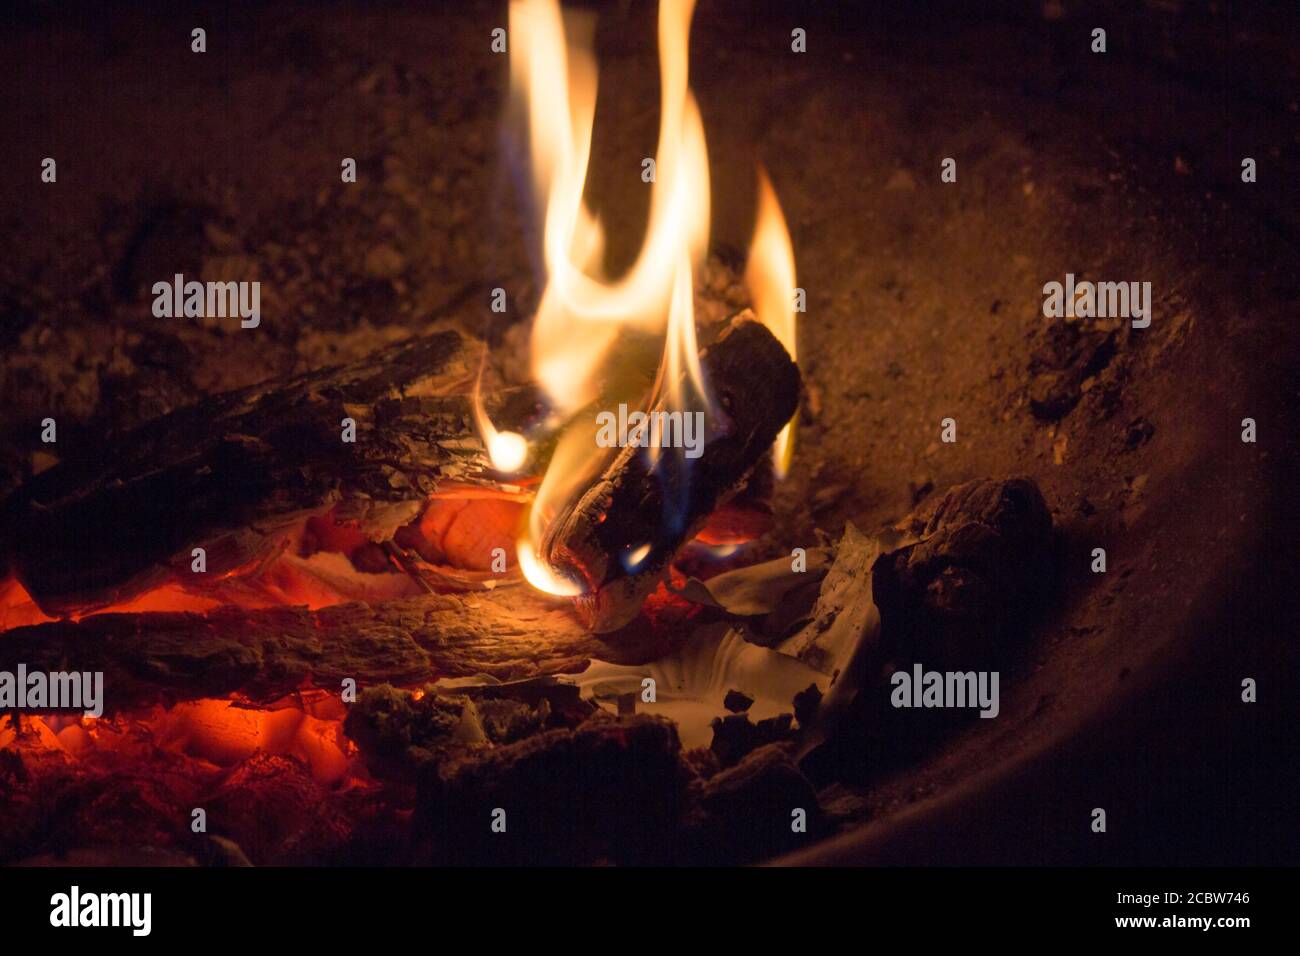 Fire flames and red-hot wooden logs in the dark Stock Photo